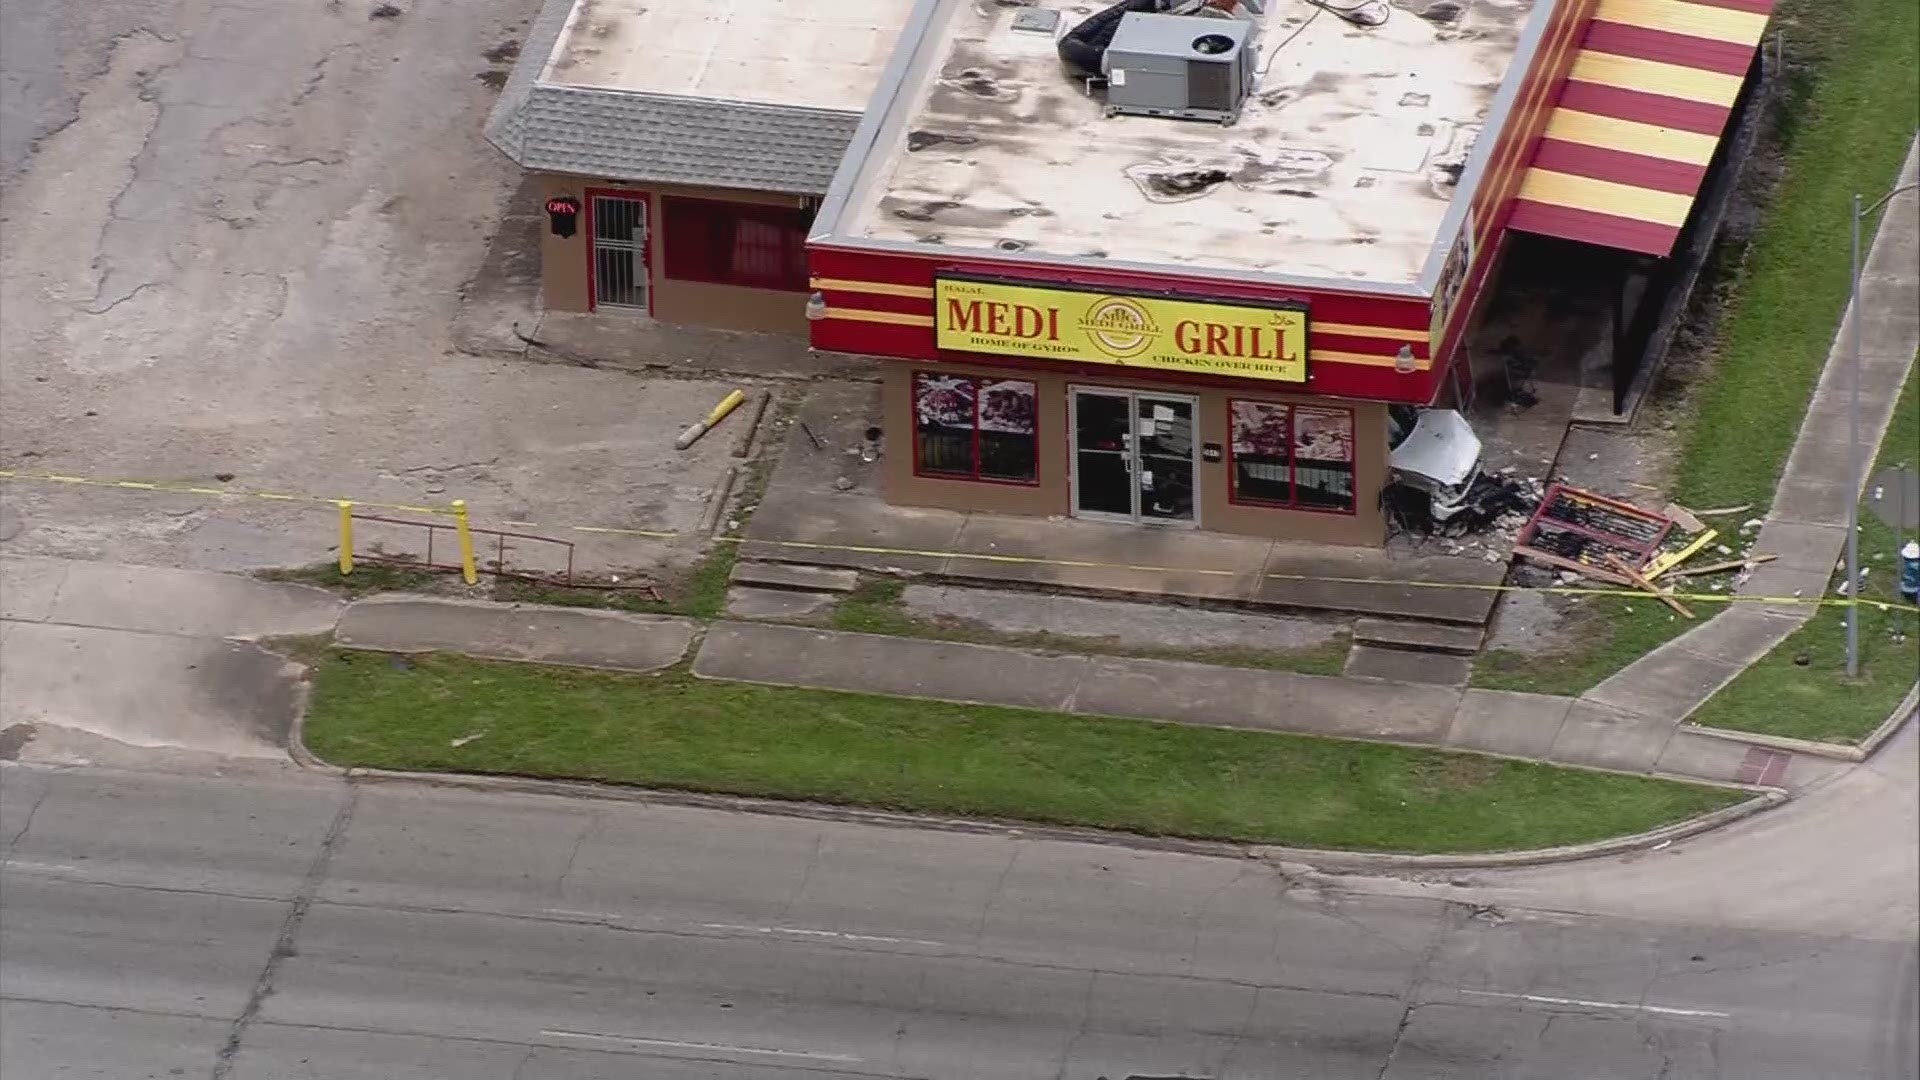 One person is dead after a SUV drove through a restaurant in southeast Houston. The vehicle went entirely inside the restaurant and came to a stop in a narrow space between two support columns.